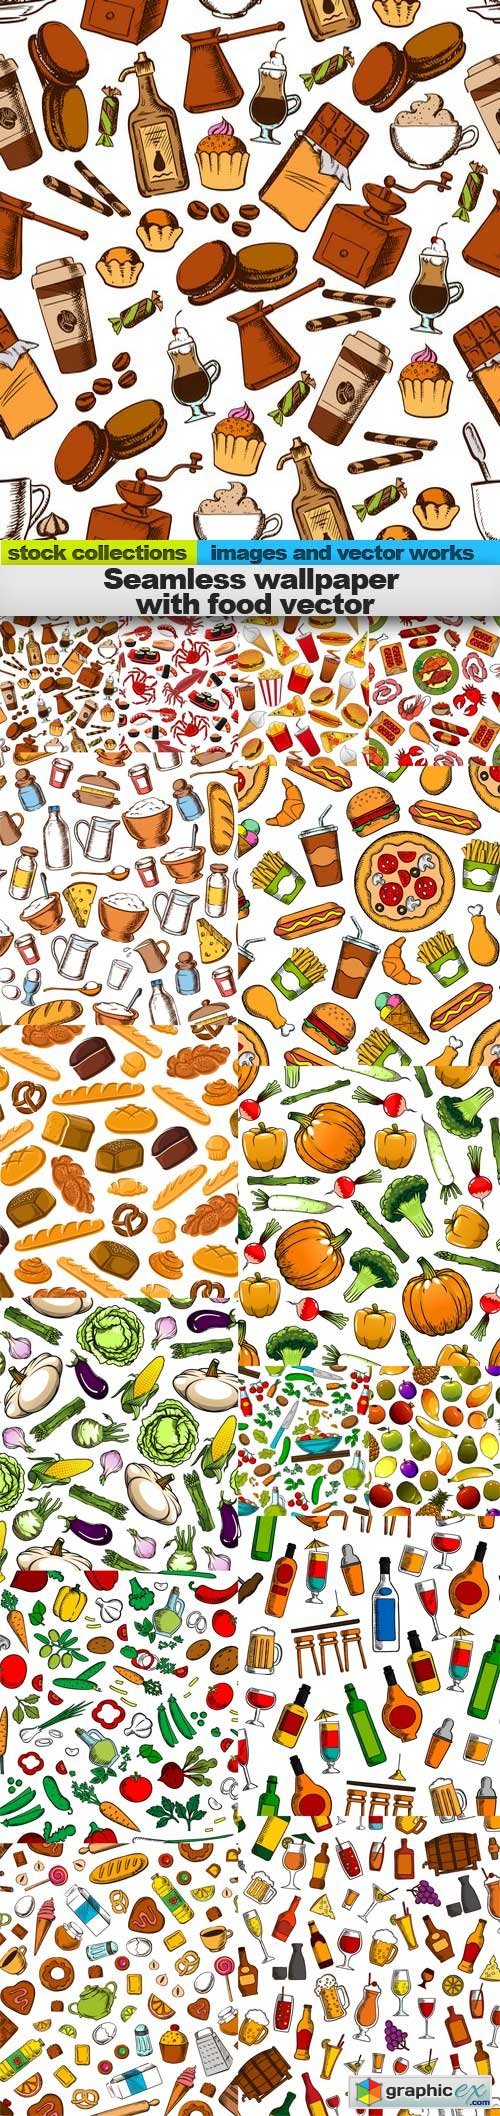 Seamless wallpaper with food vector, 15 x EPS